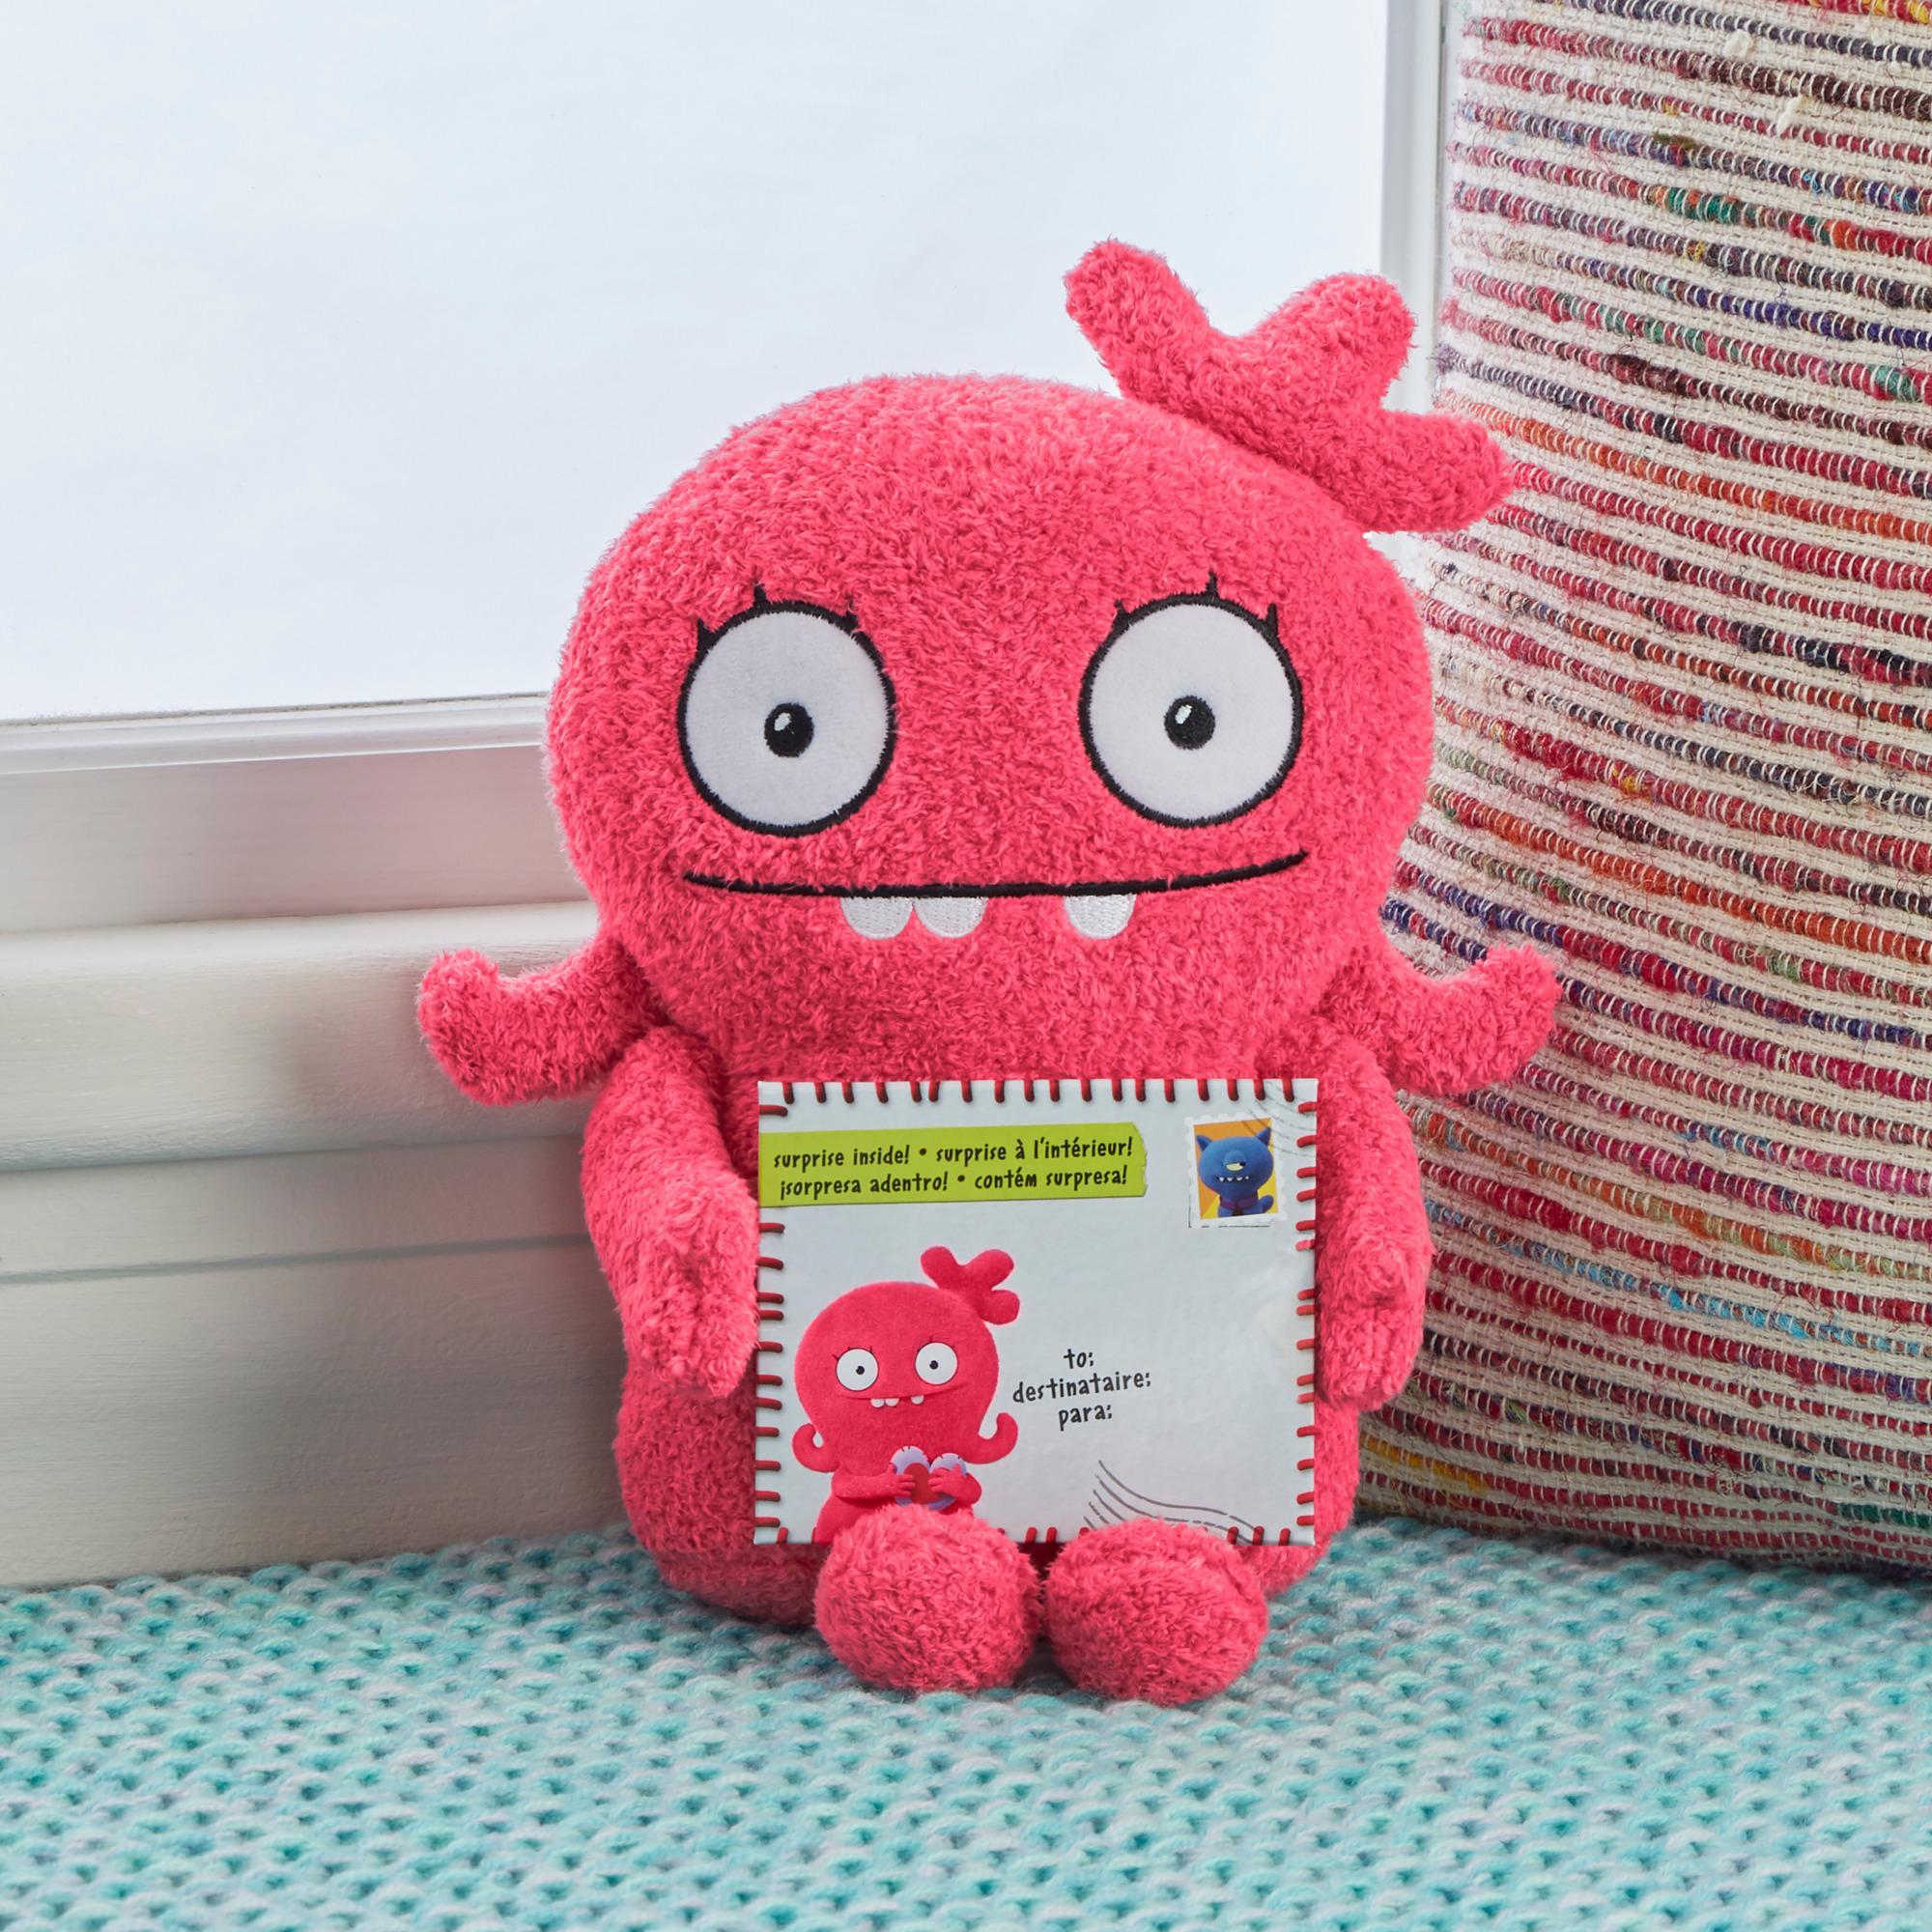 UglyDolls Yours Truly Moxy Stuffed Plush Toy, 9.75 inches tall product thumbnail 1